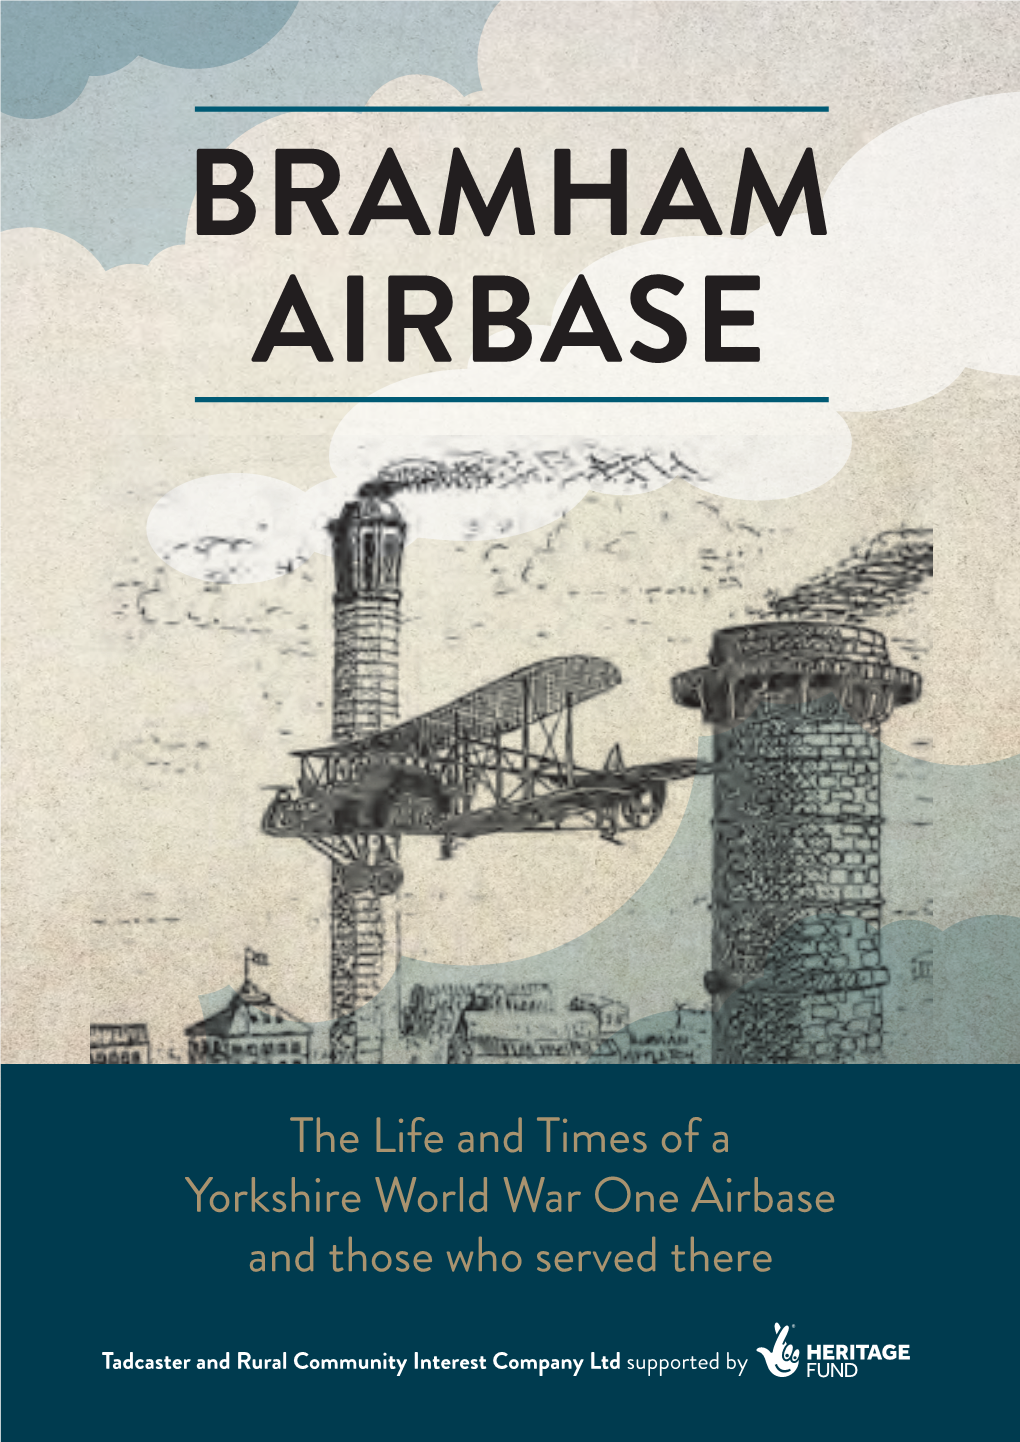 The Life and Times of a Yorkshire World War One Airbase and Those Who Served There